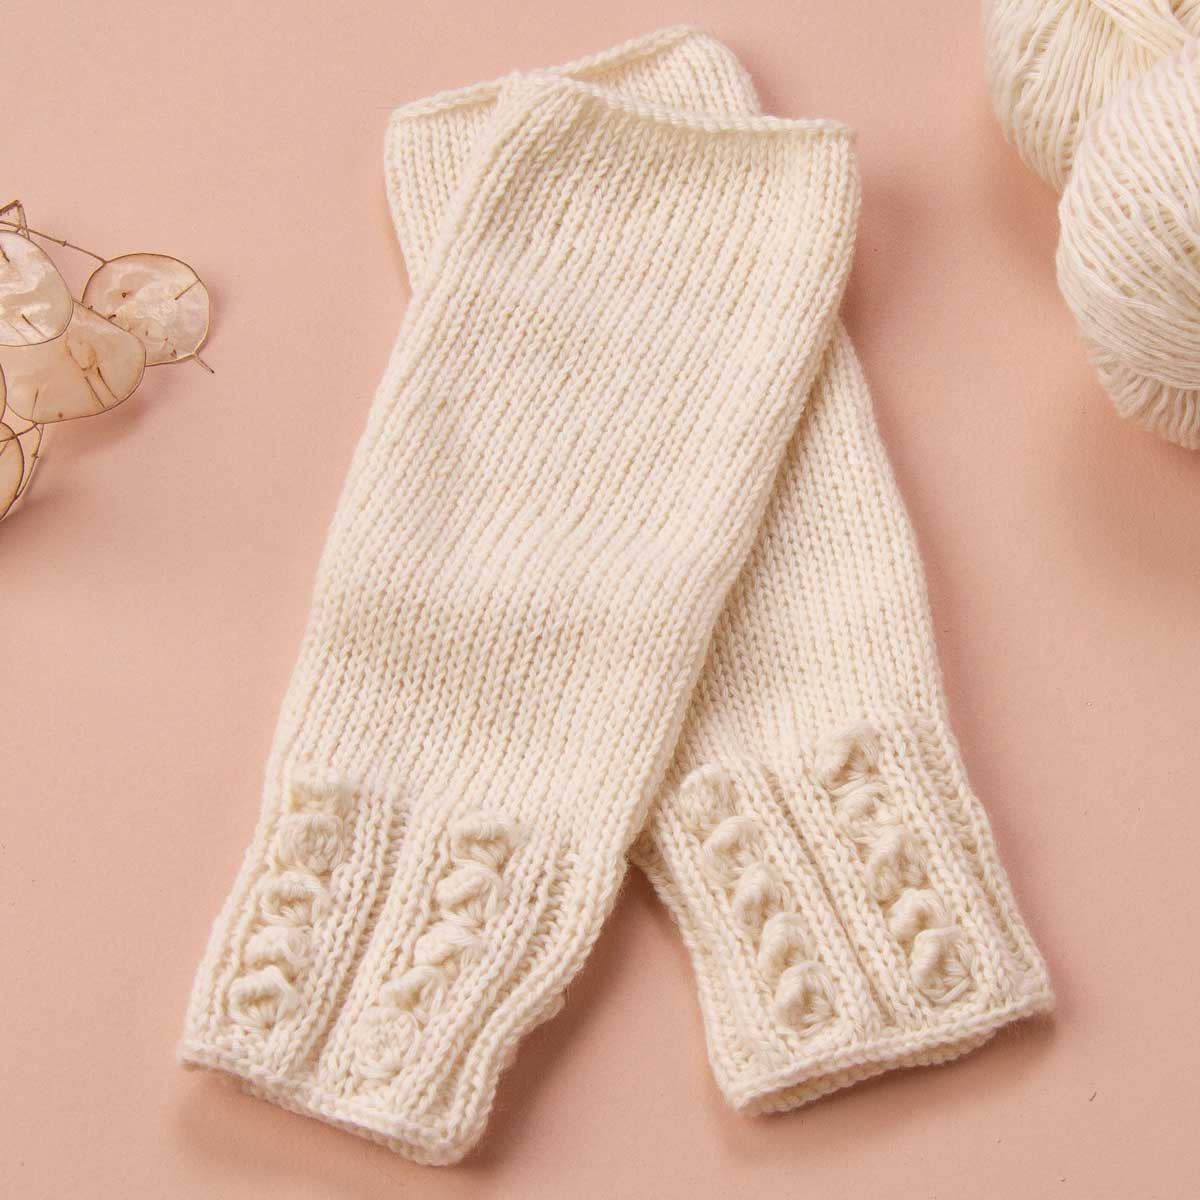 Asnelles ready-to-knit Mittens